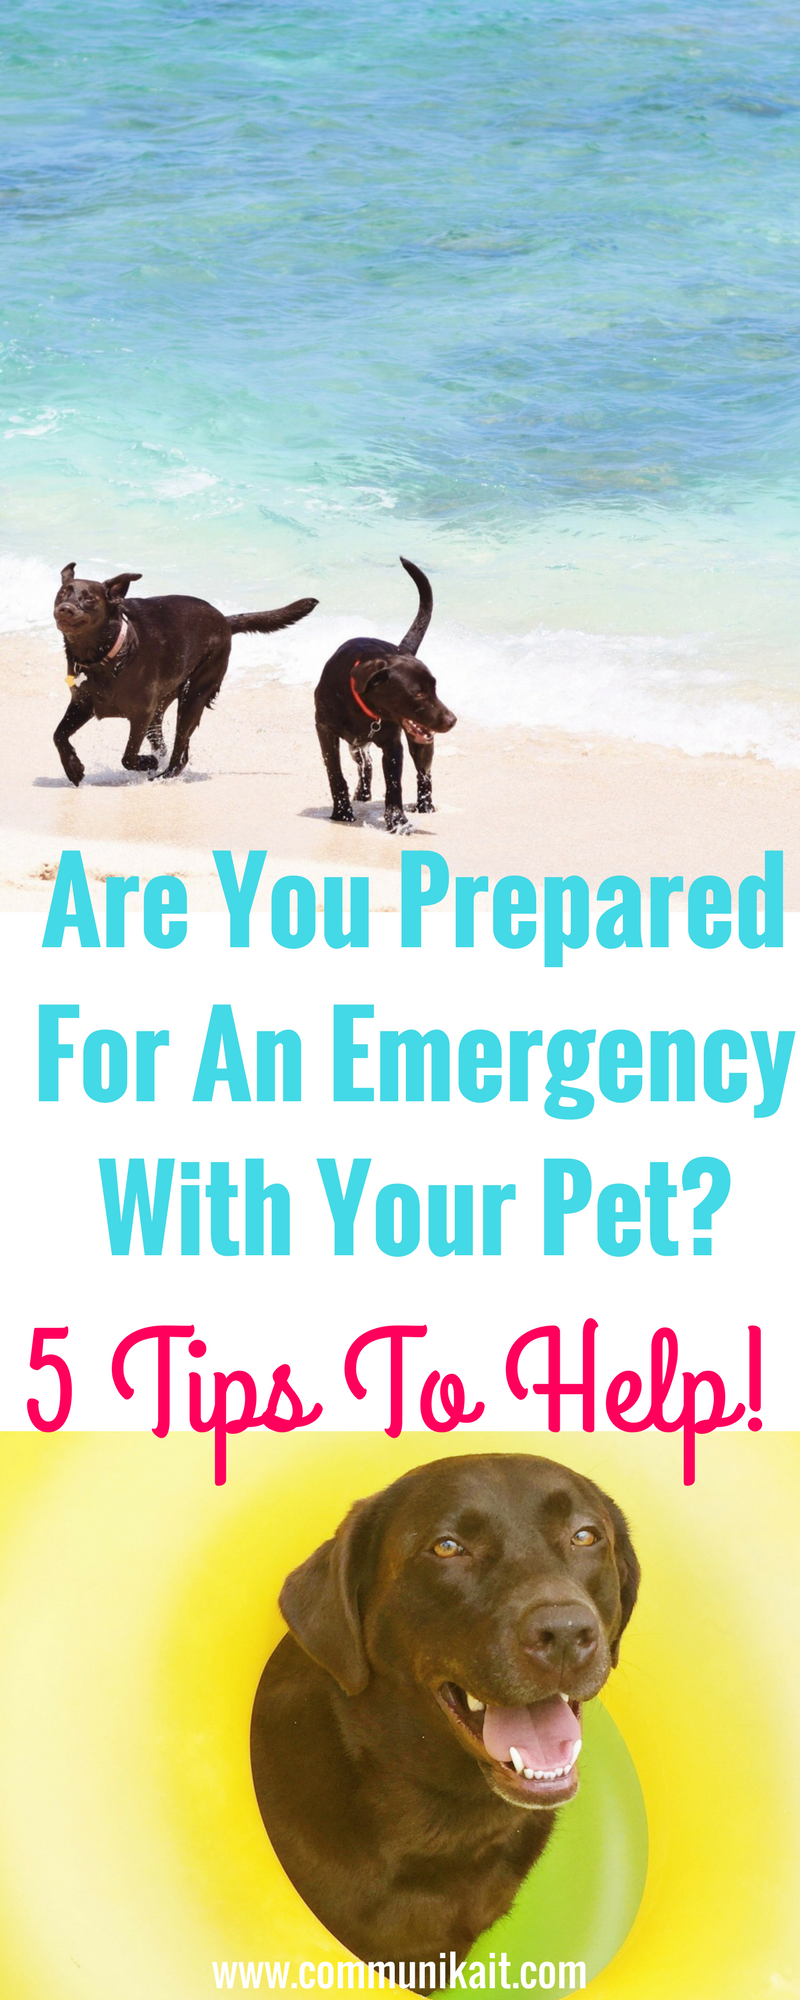 Are You Prepared For An Emergency With Your Pet? - Tips For Pets - Puppy Tips - Life Hacks For Dogs - Puppy Tips - Dog Care - Communikait by Kait Hanson - Chocolate Labrador